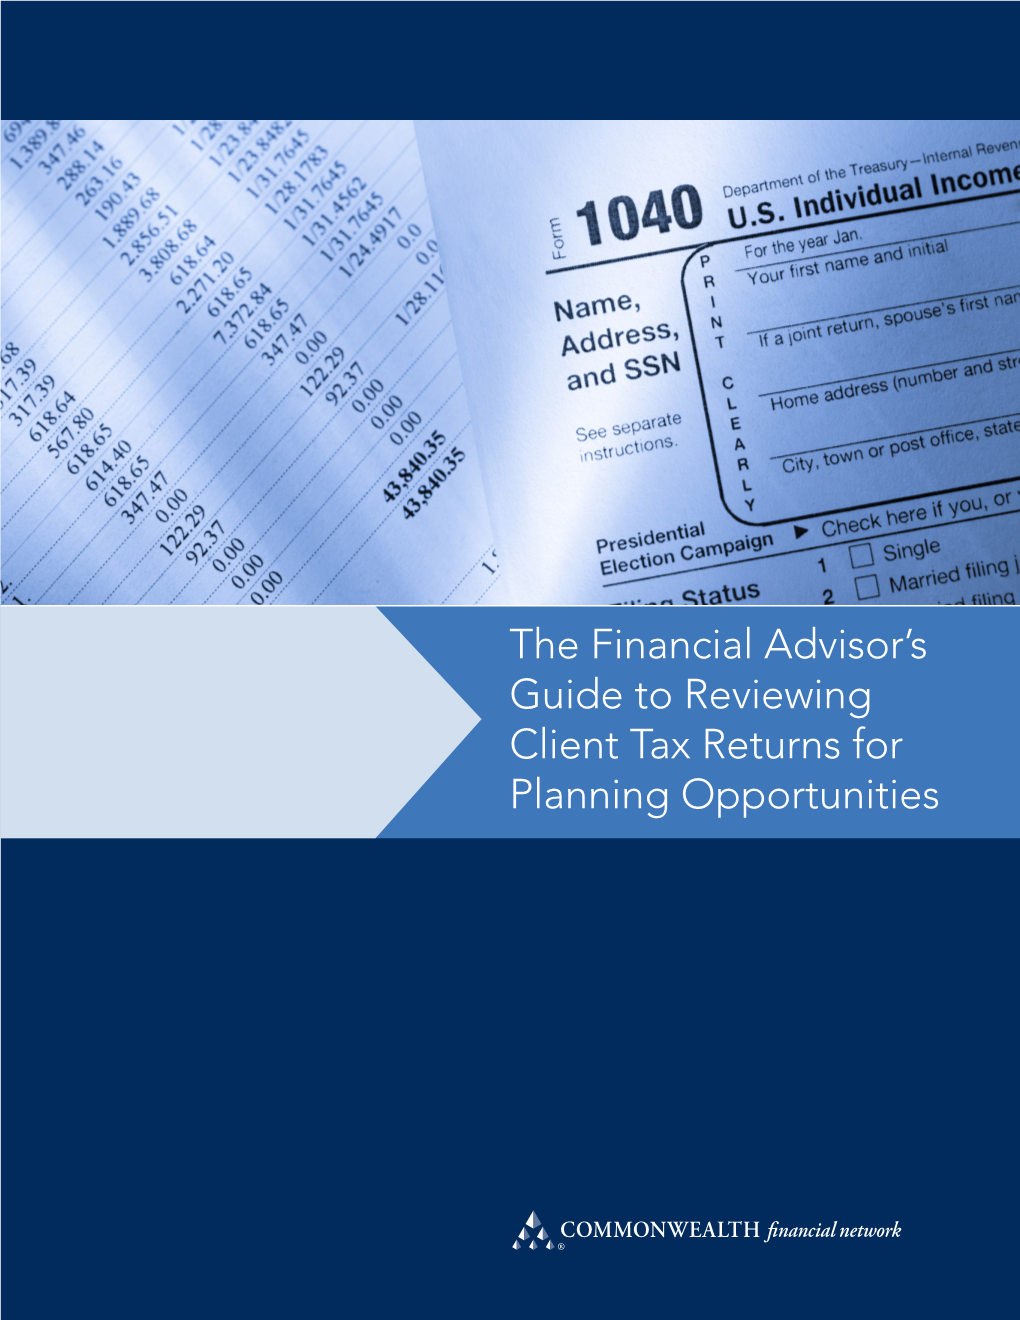 The Financial Advisor's Guide to Reviewing Client Tax Returns For